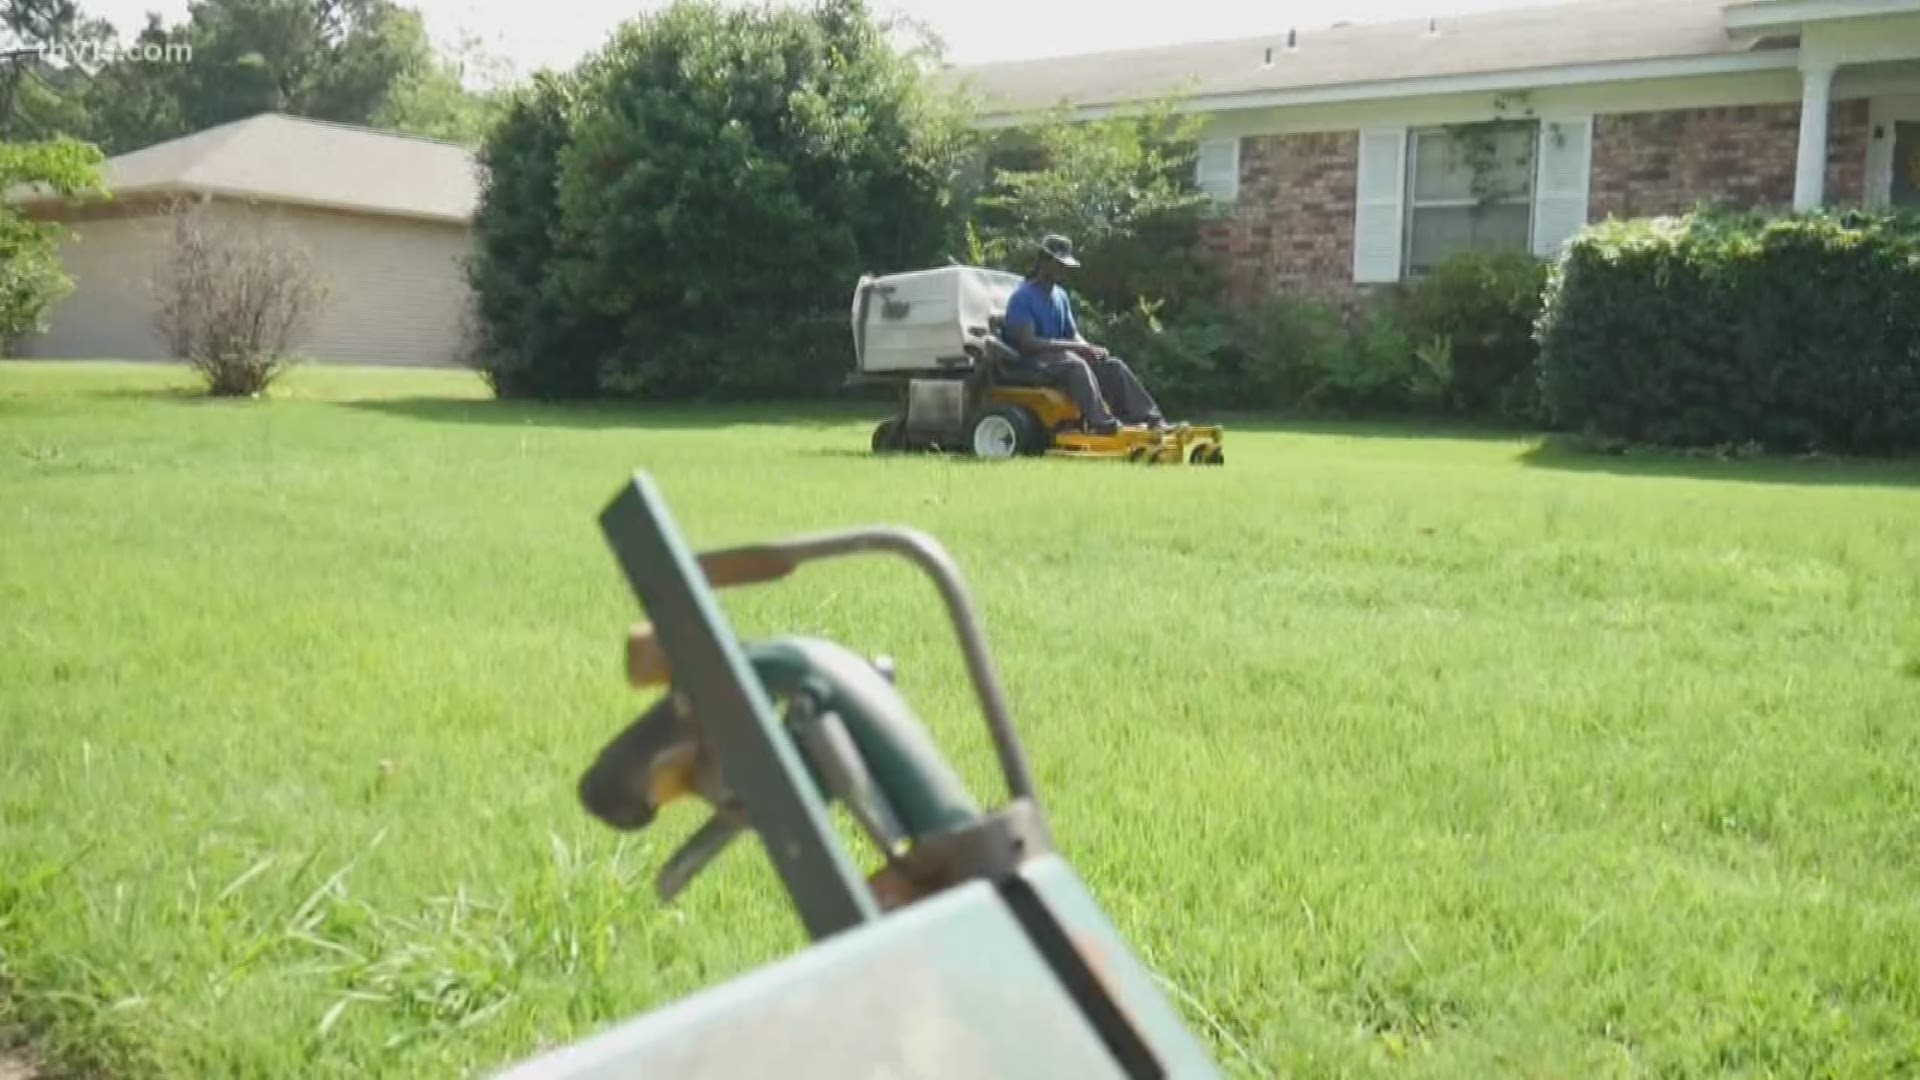 With the amount of rain we've seen this year, your grass is probably growing like crazy, and if you don't want to mow it yourself, and don't know who to turn to, we've got the new technology that can help.